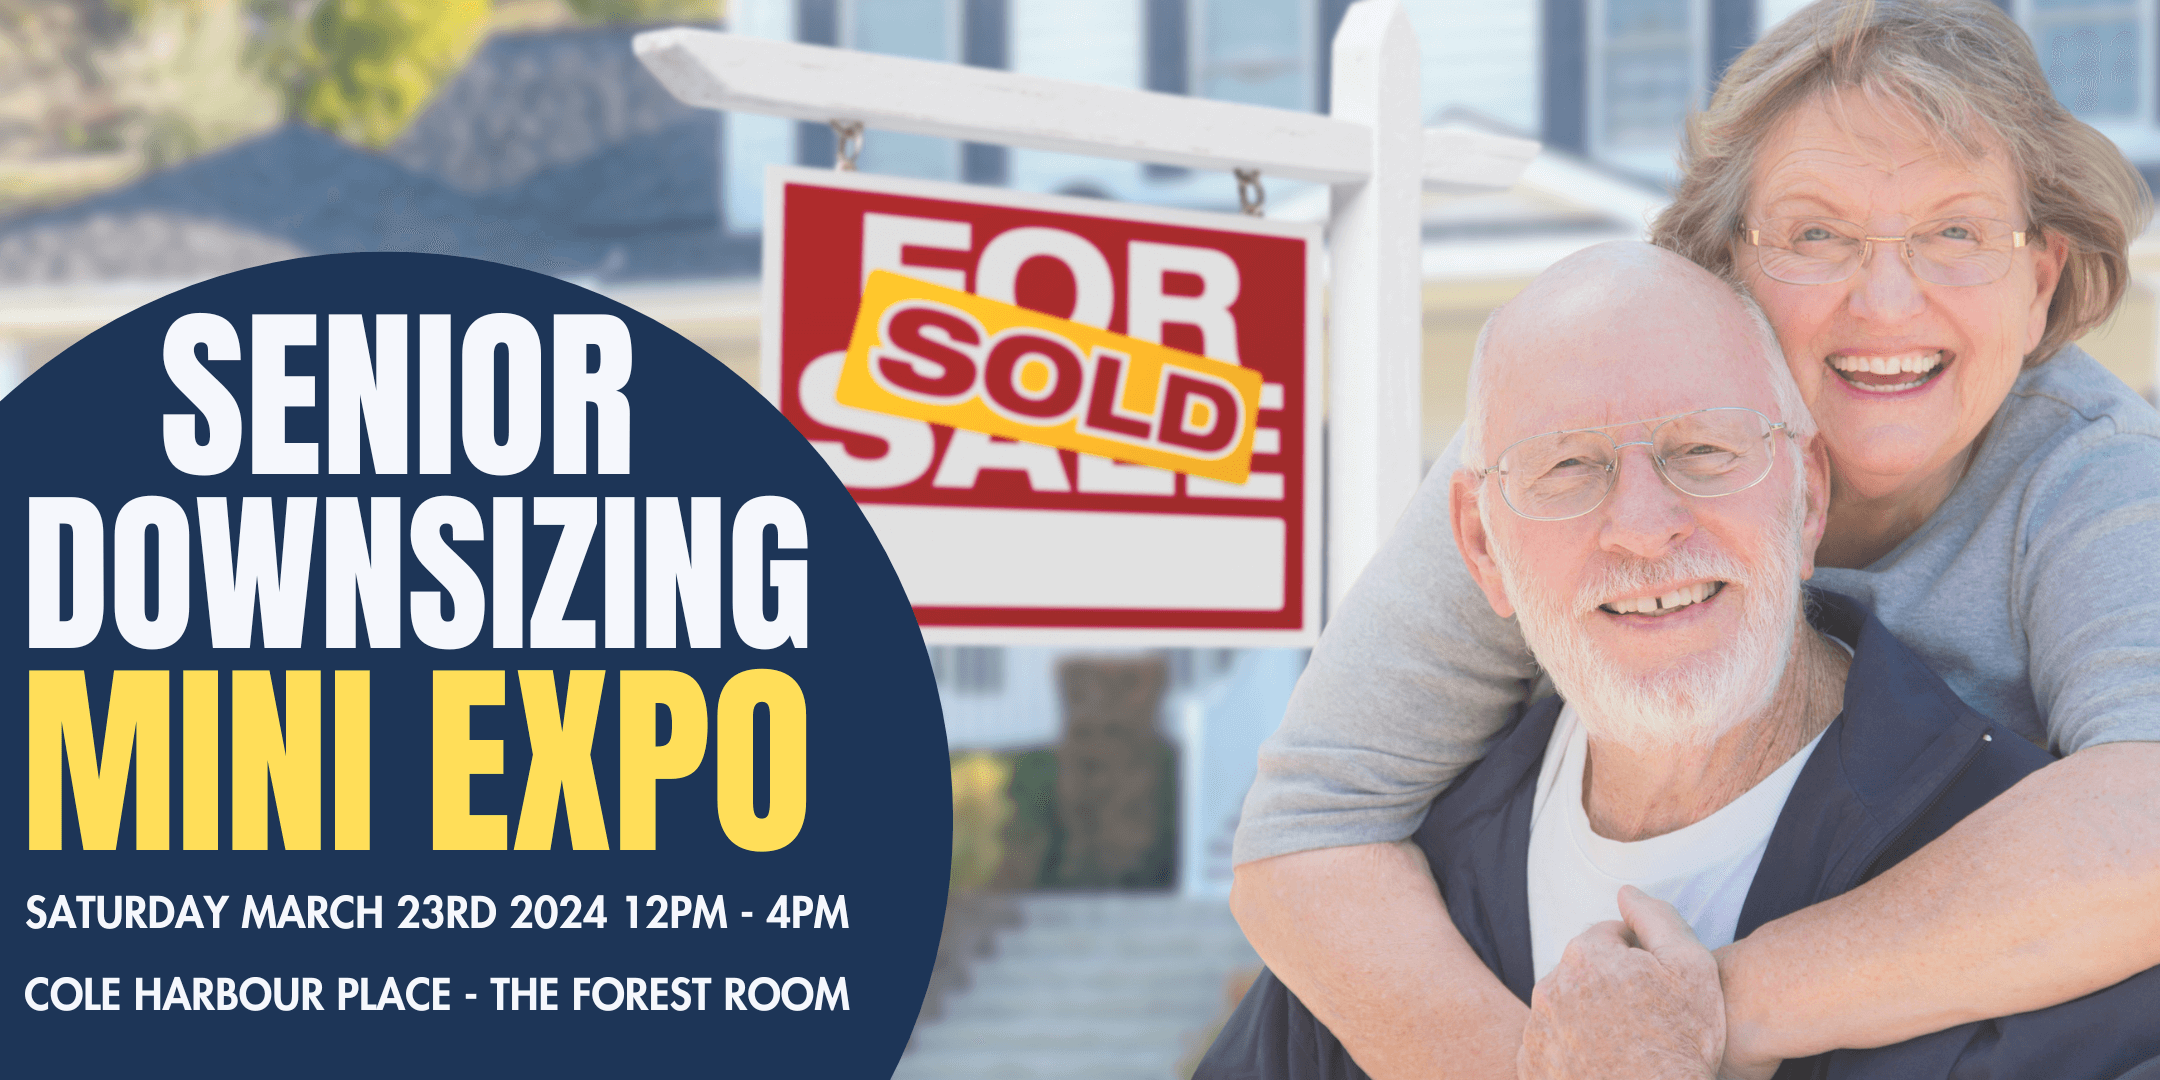 Senior Downsizing Mini Expo at Cole Harbour Place